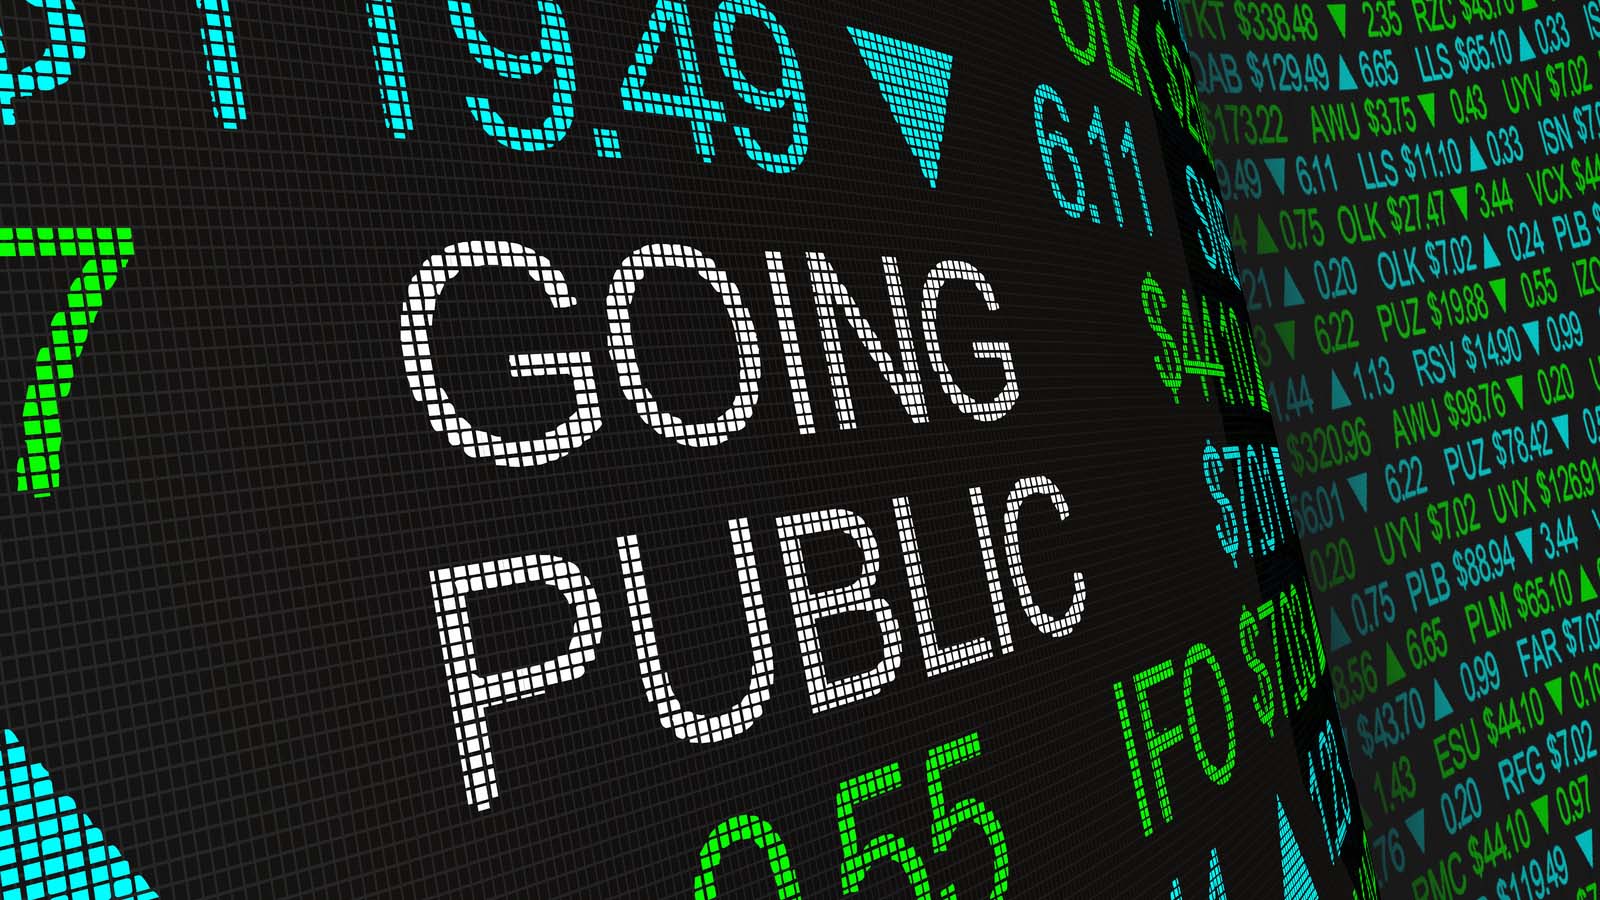 "Going Public" is displayed in white text on a digital ticker tape.